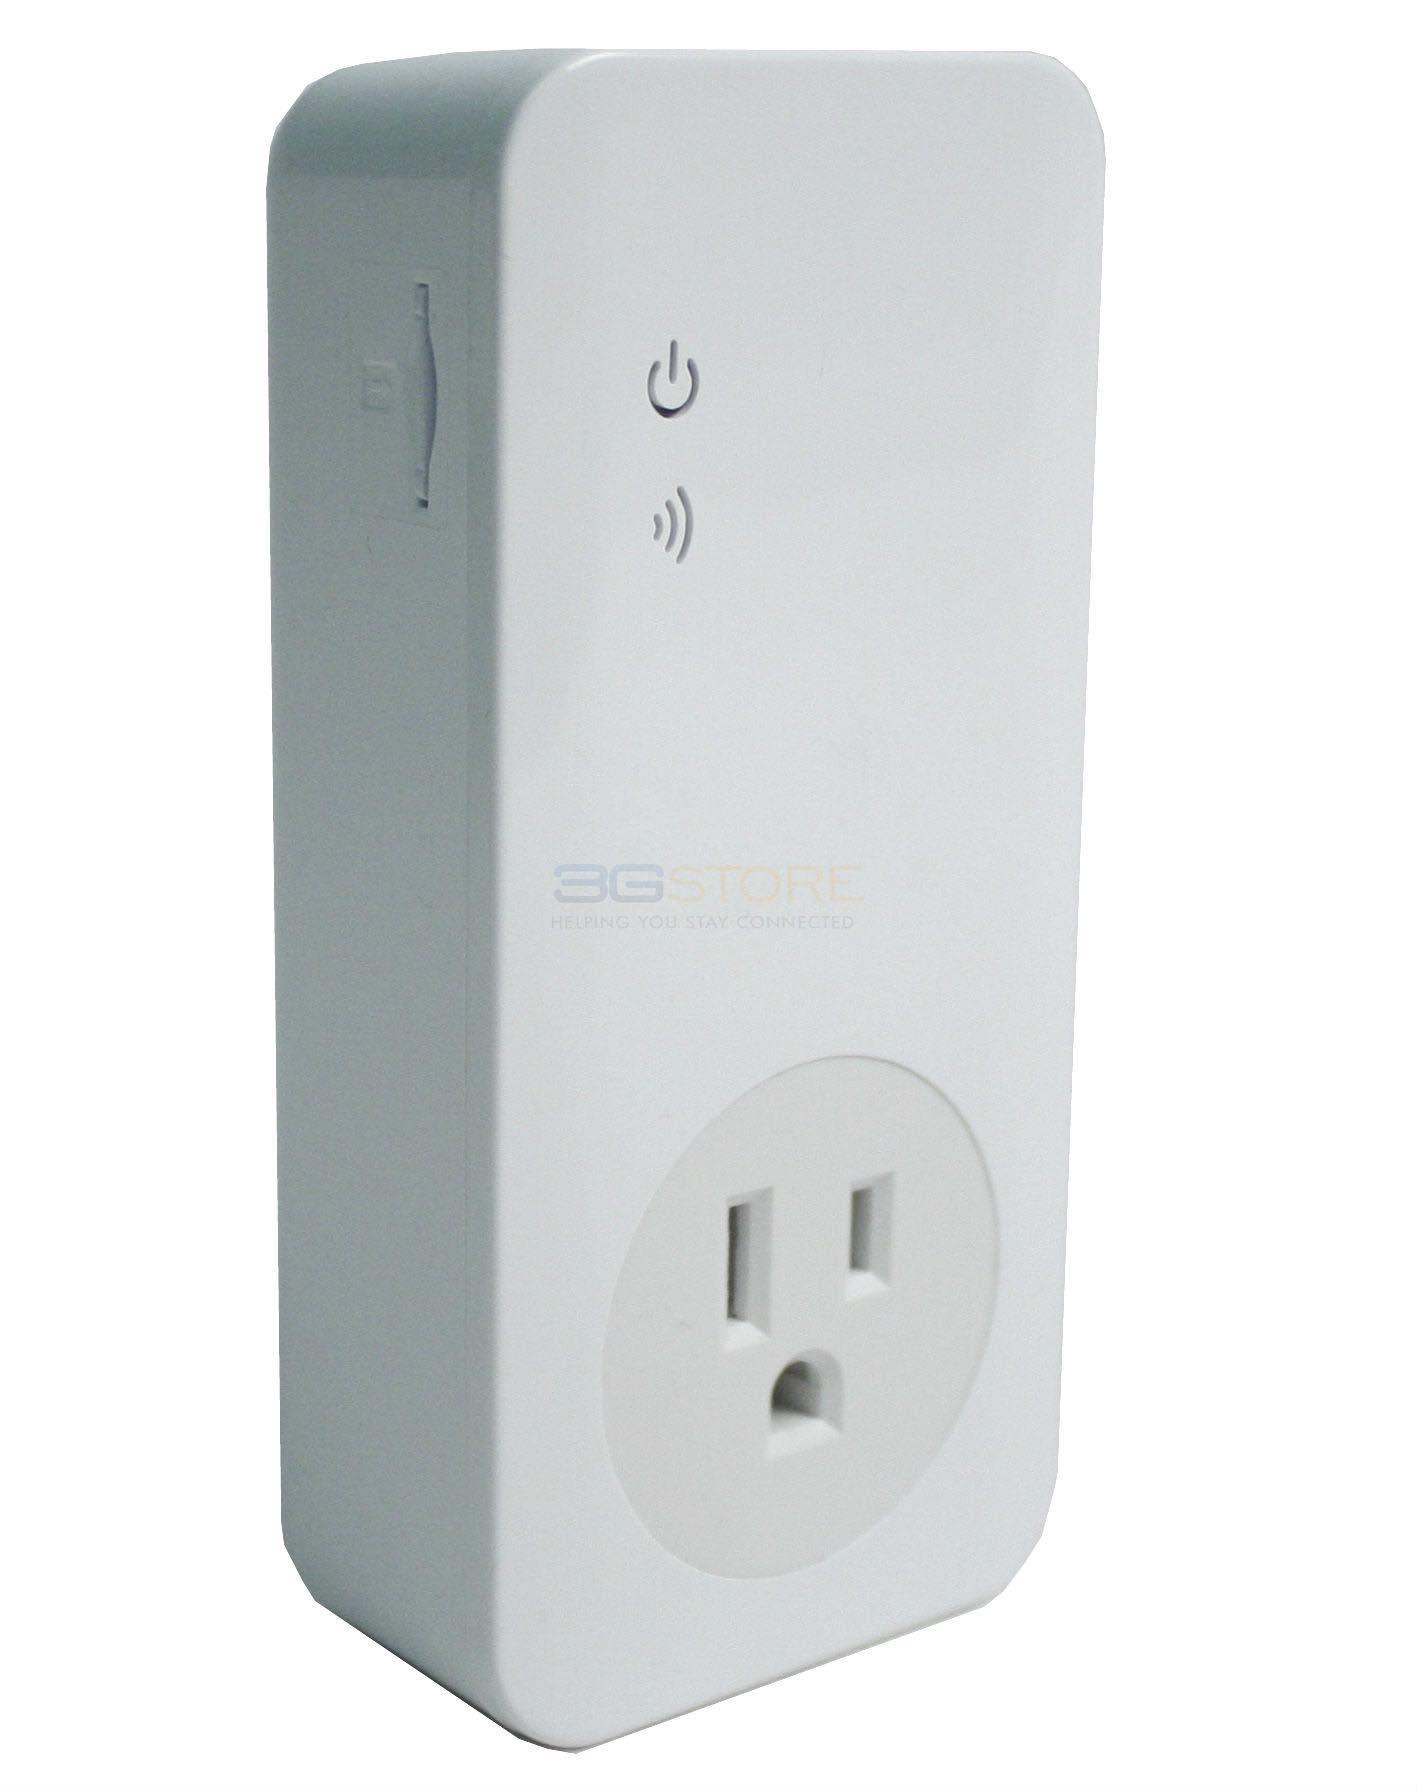 5Gstore SMS Power Switch (1 Year Service Included) - Click Image to Close